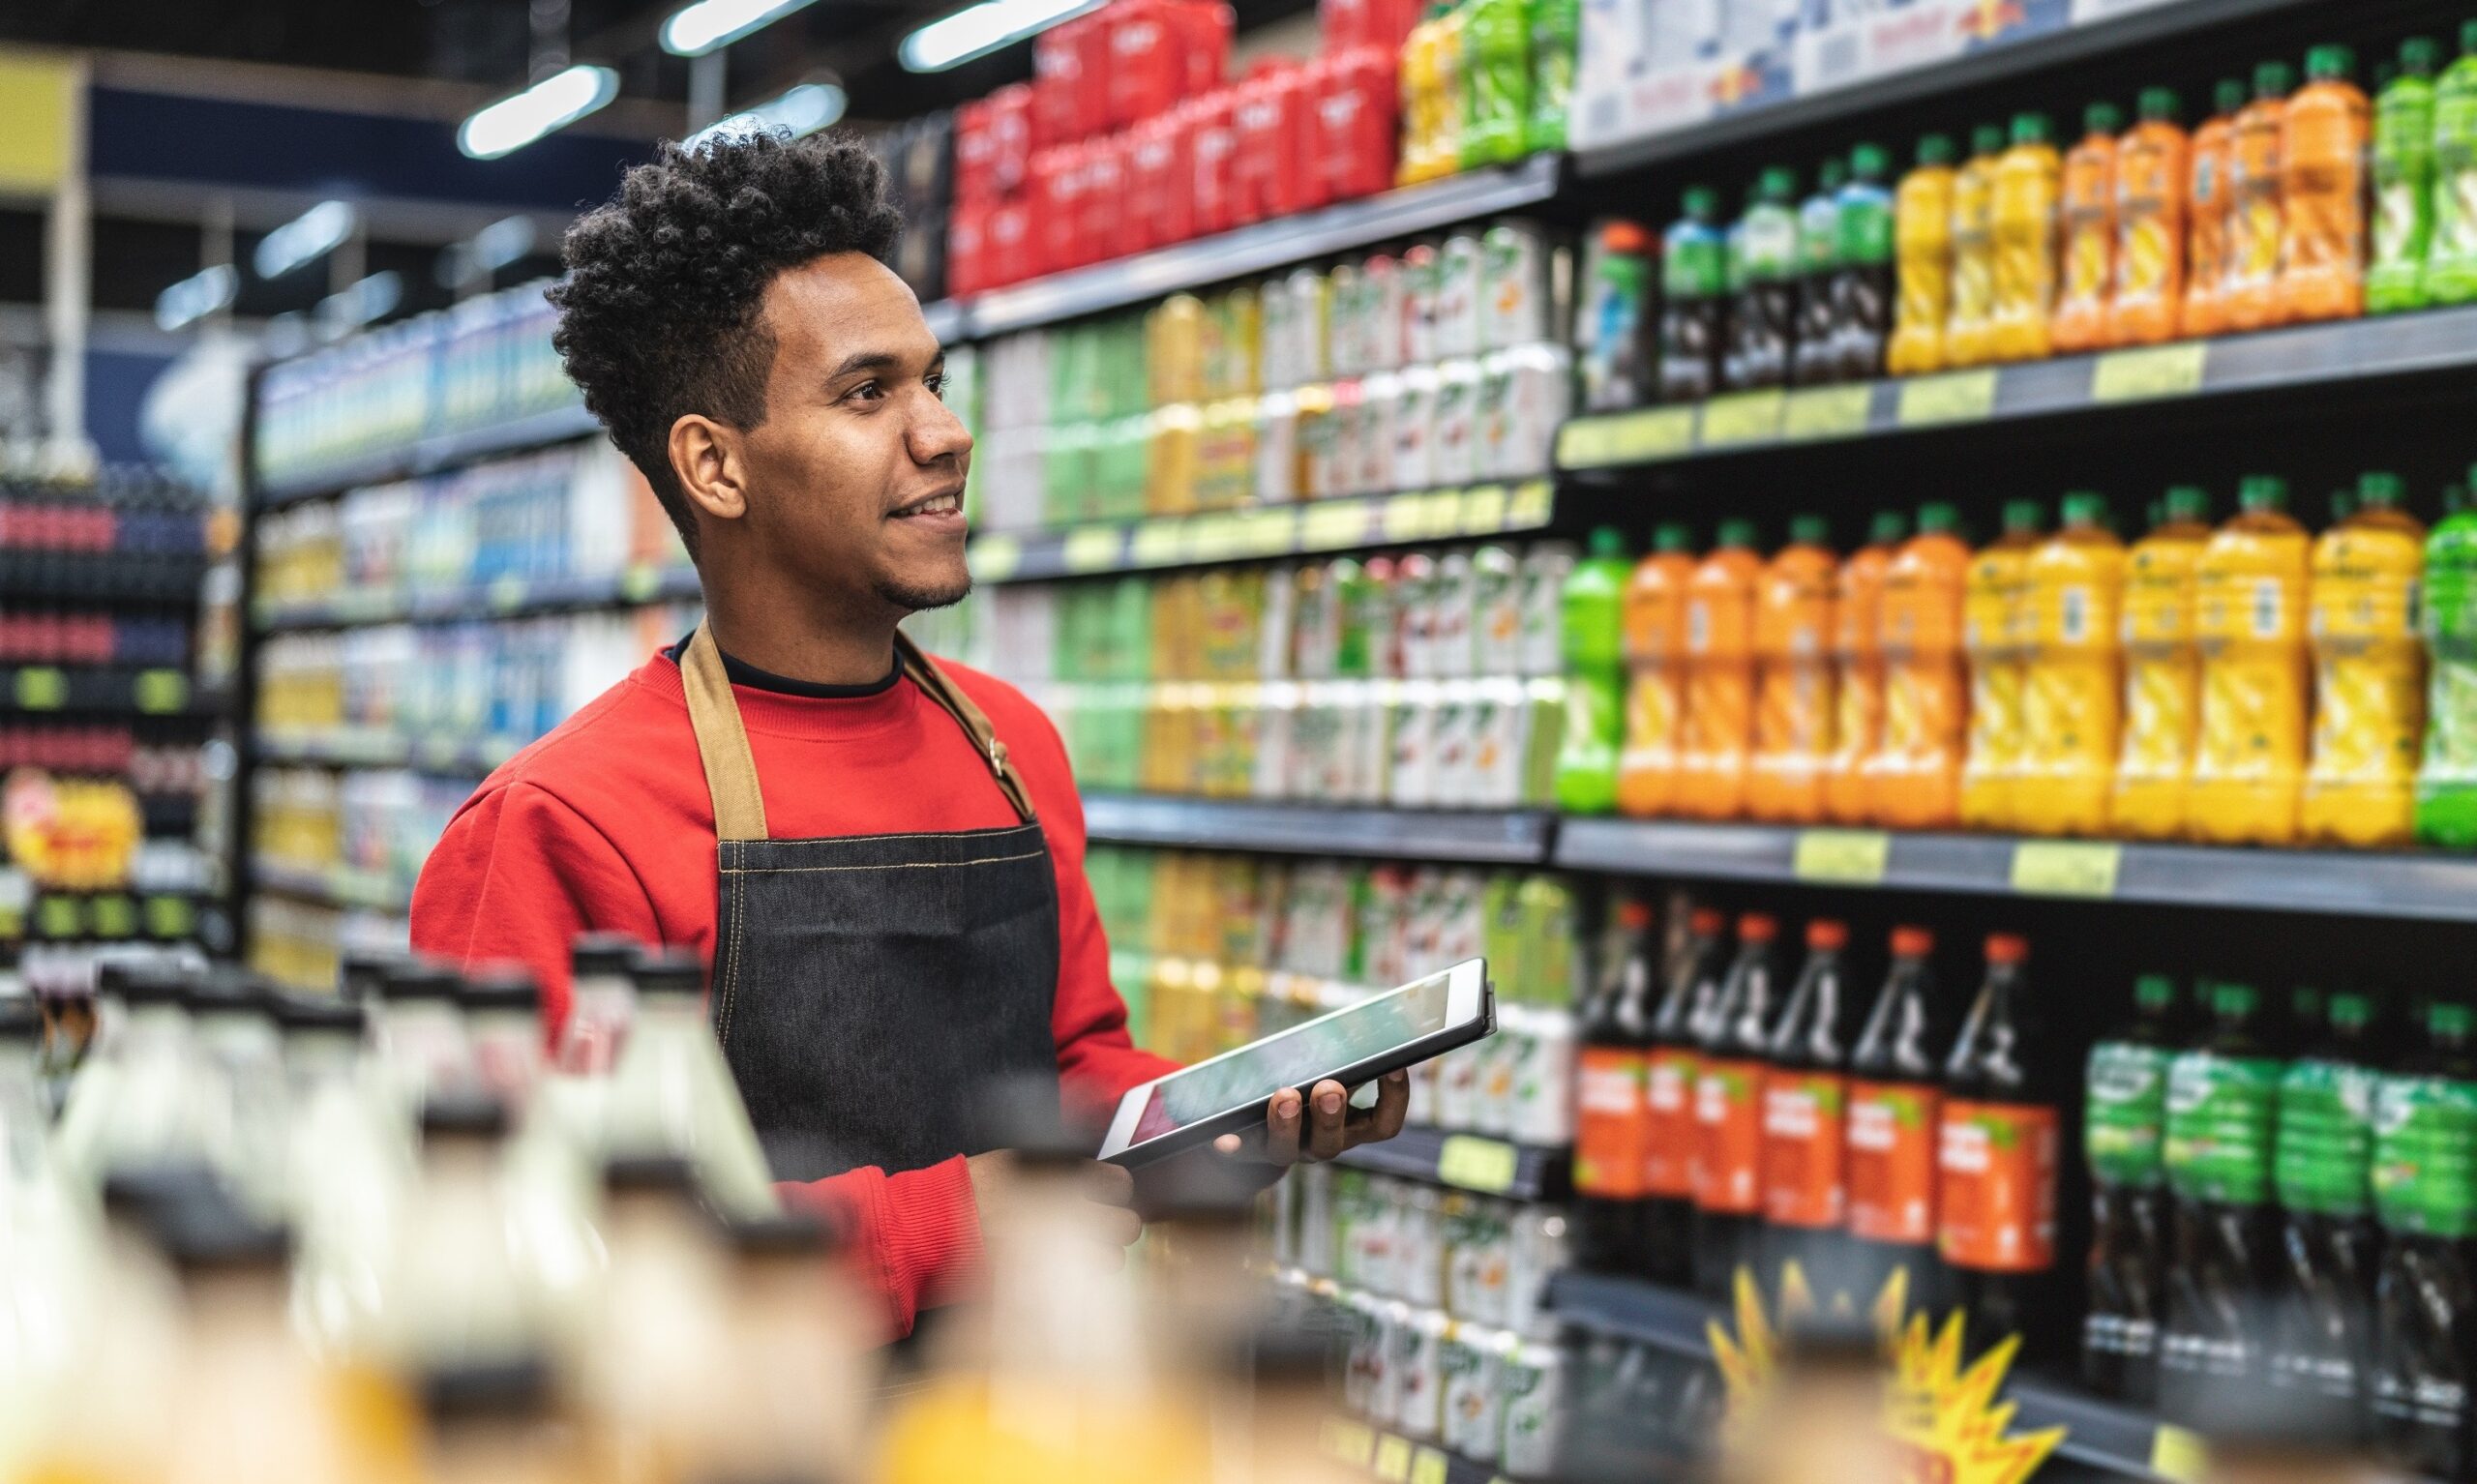 Photo of a young male grocery store employee holding a tablet and standing in front of shelves of beverages.